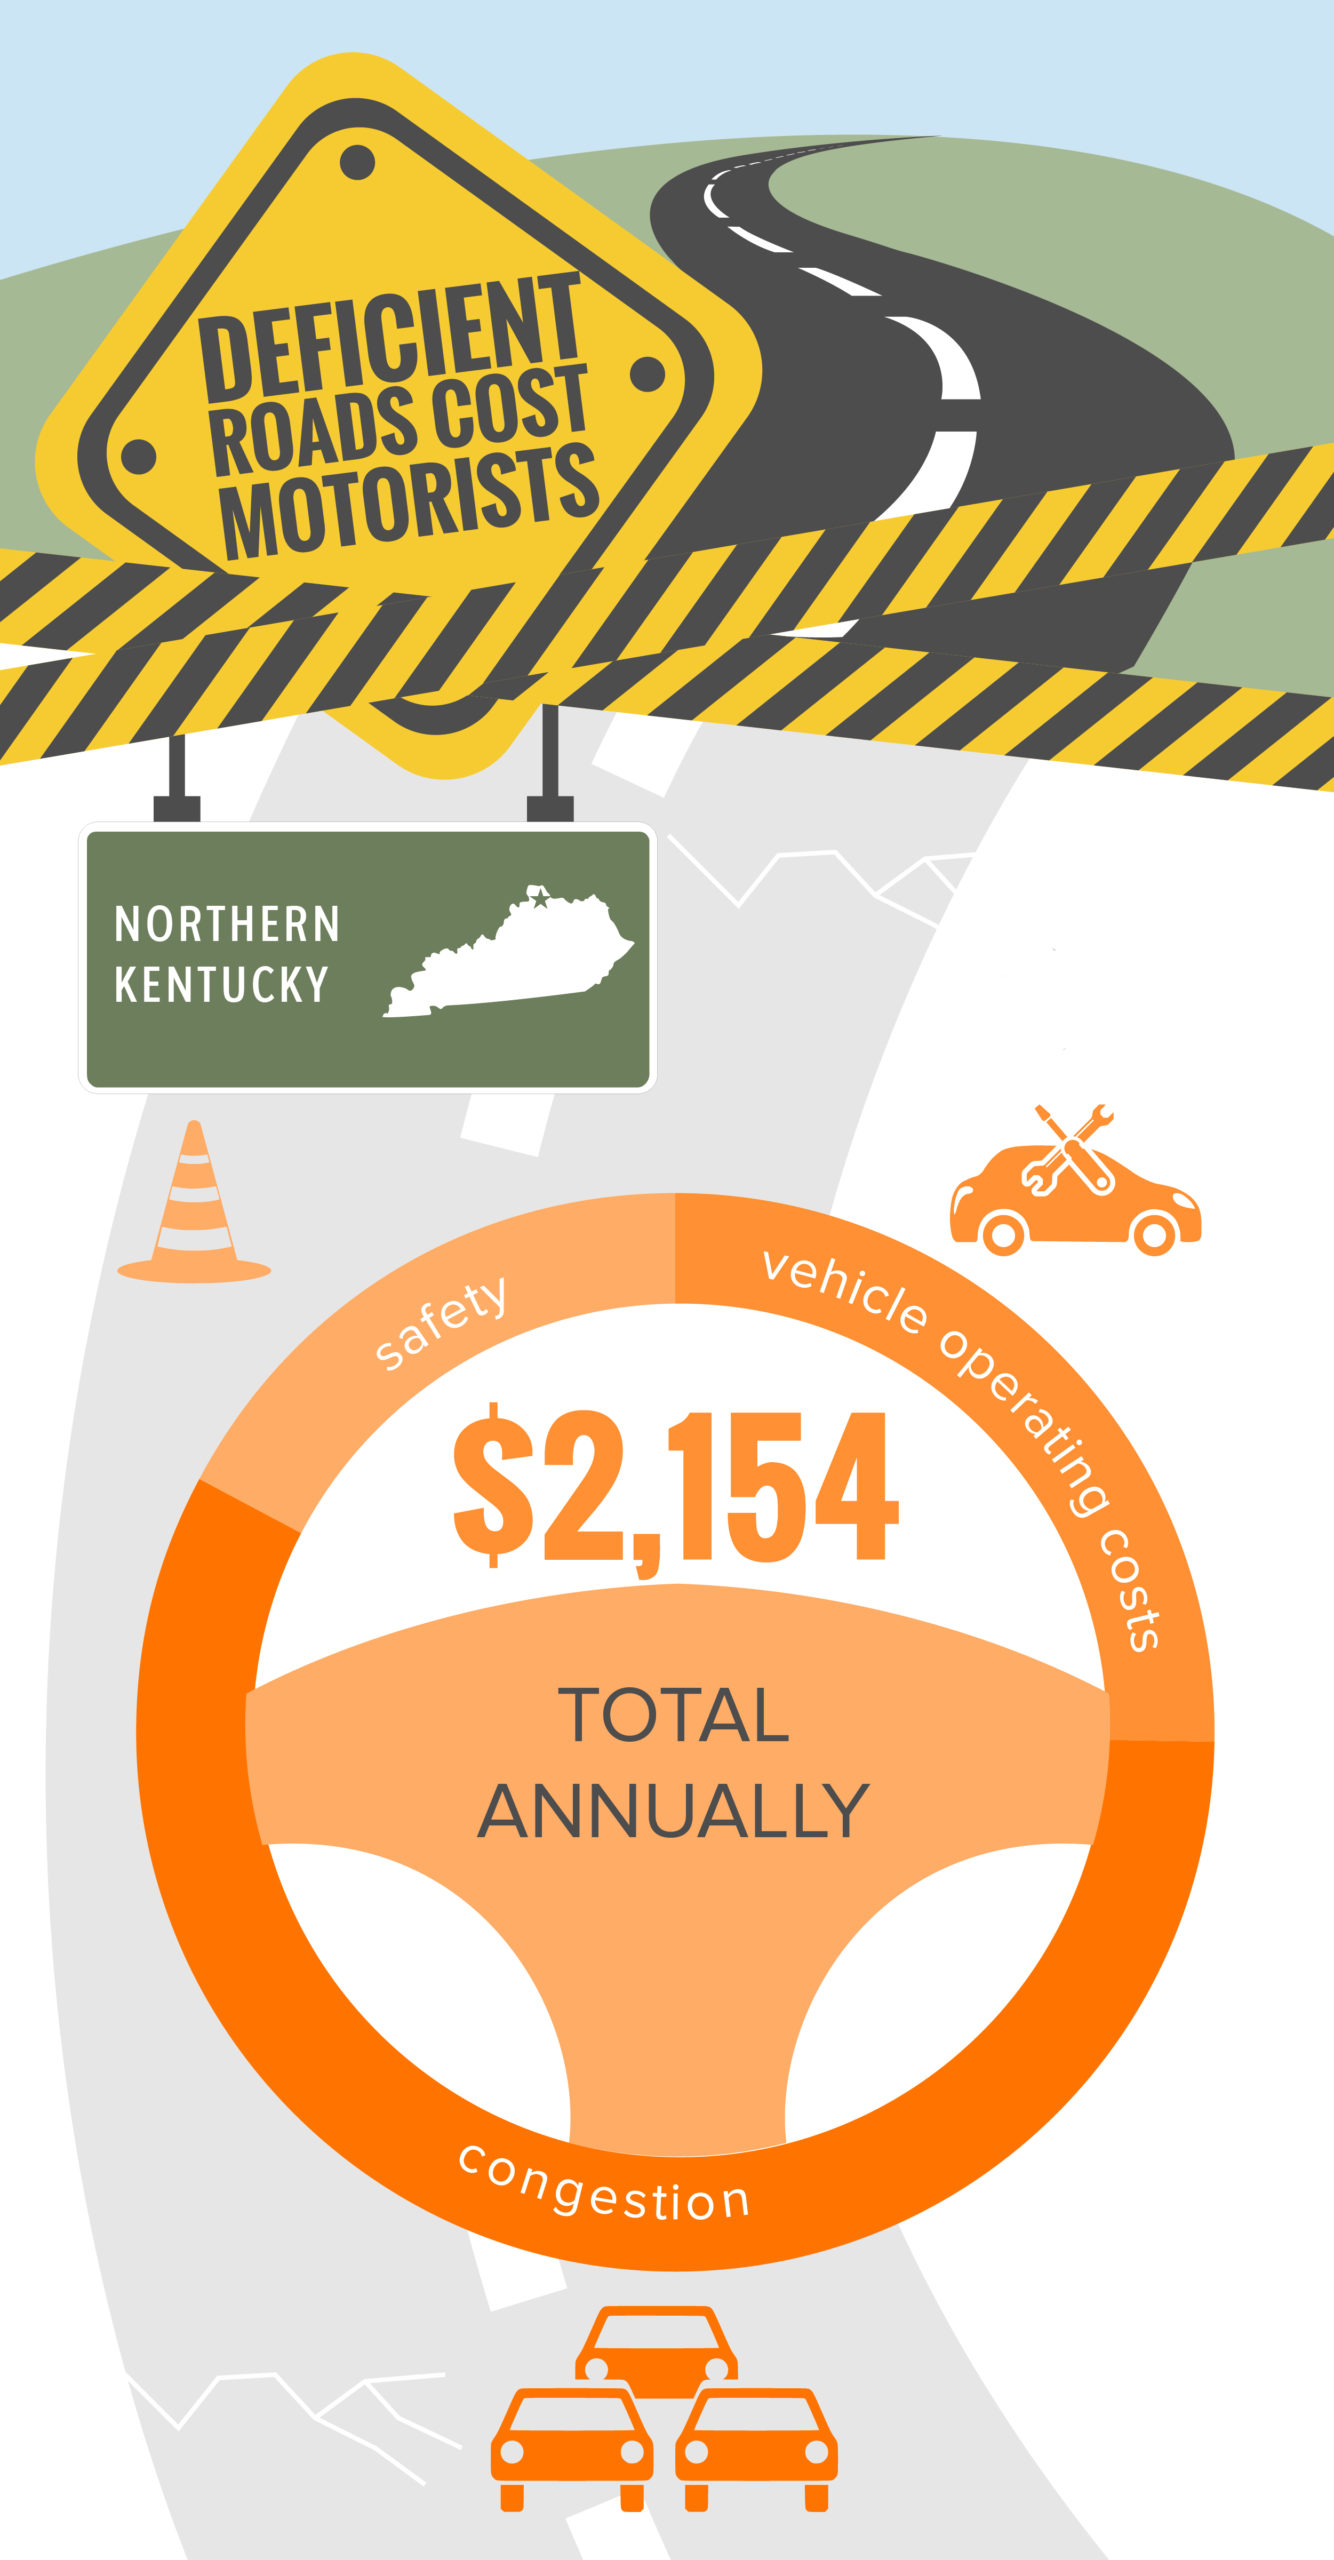 Northern Kentucky Deficient Roads Cost to Motorists Infographic – February 2022